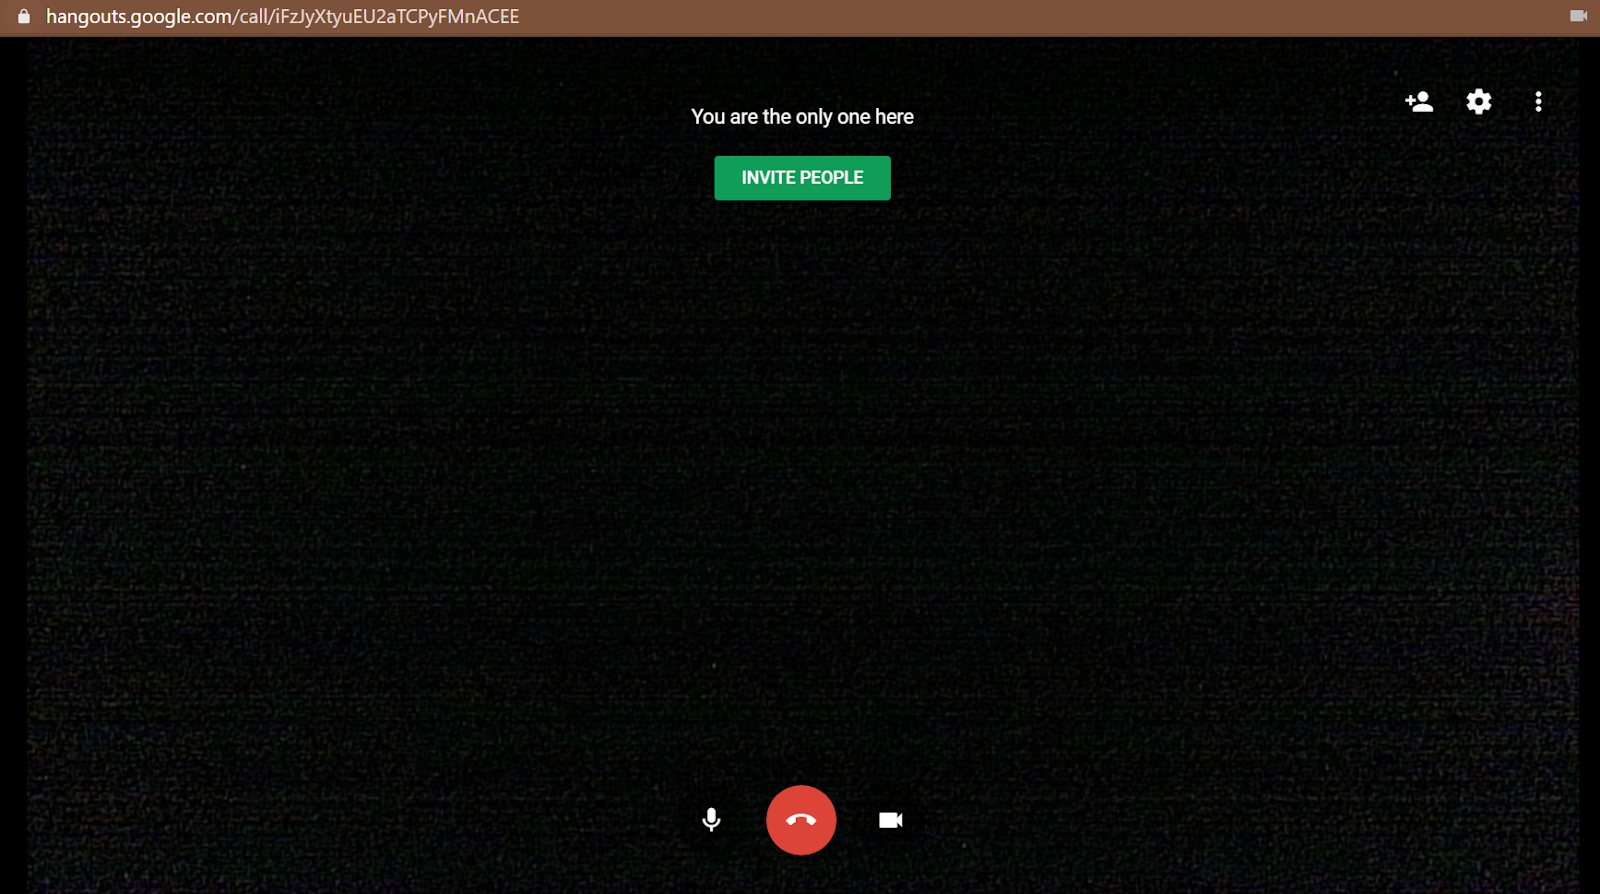 How to use Google Hangouts: Google hangouts in web browser